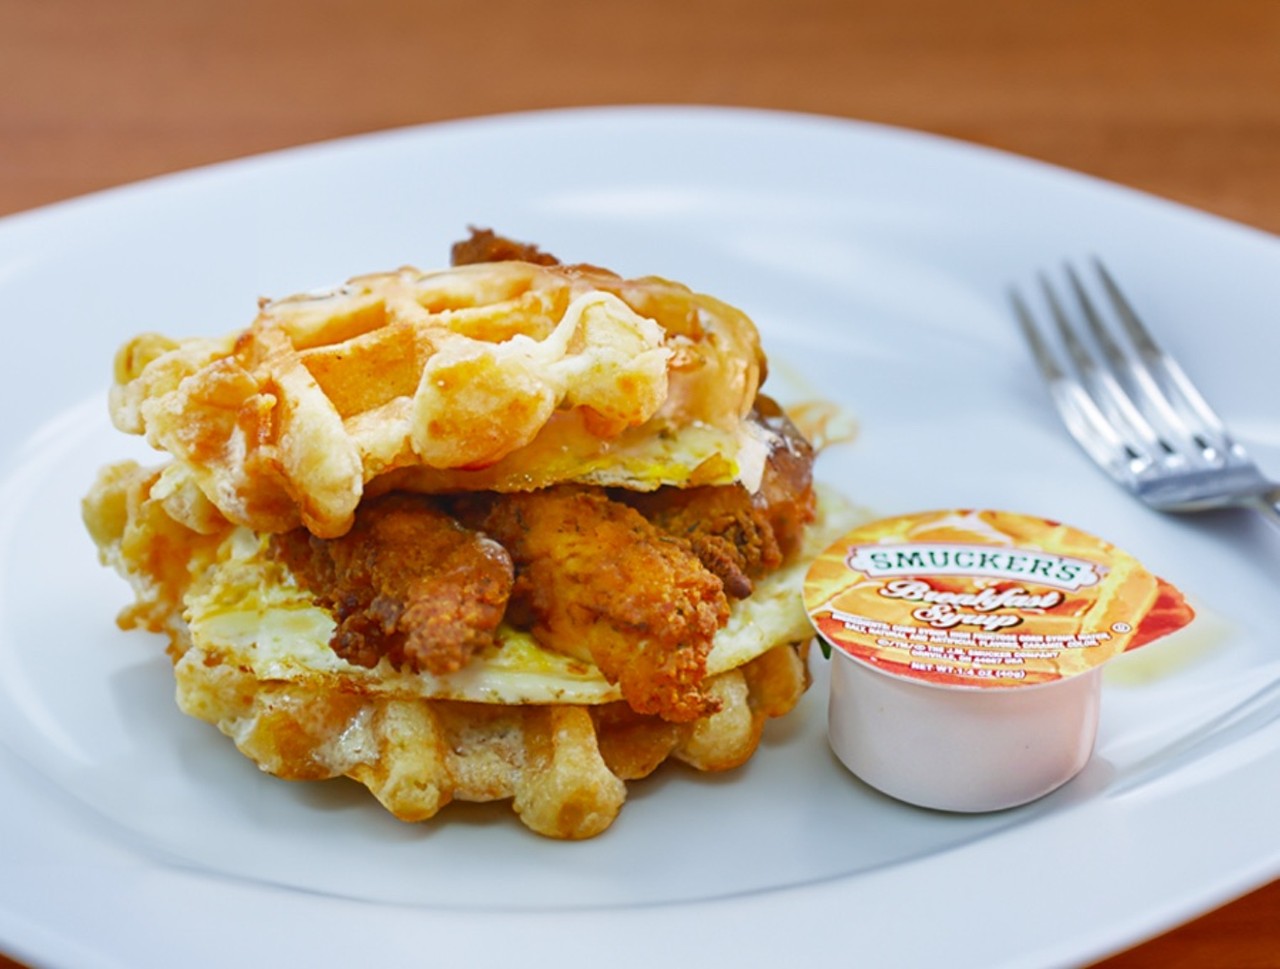 Waffle Chicken Sandwich
Two waffles, pepperjack cheese for that spicy kick, chicken tenders and two eggs. Pair this with a Cuban coffee and you’re set!
Location: The Bean Bar Co